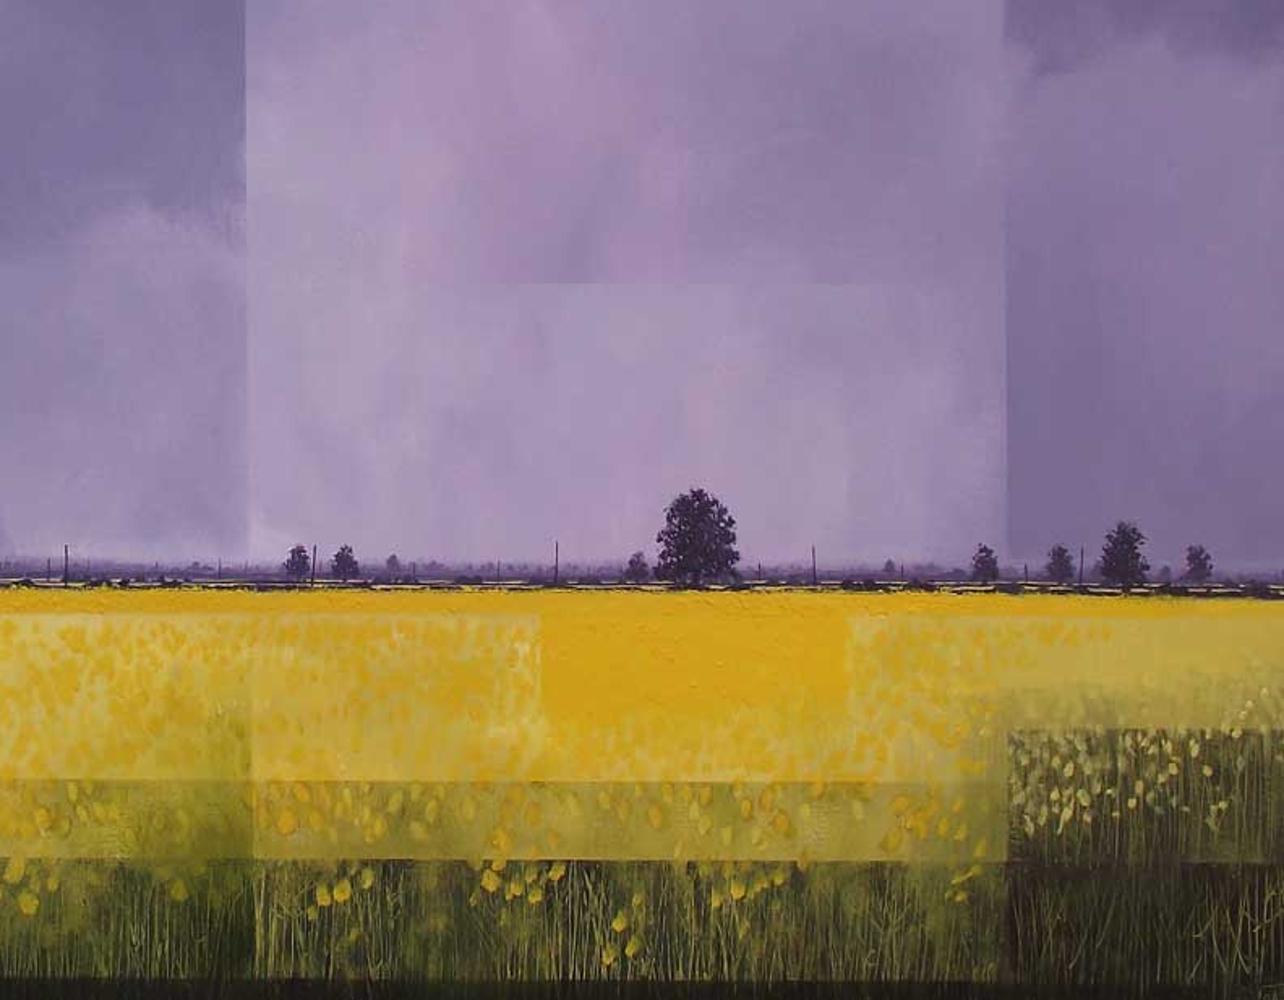 A Giant of the Gold Fields - Contemporary British Landscape: Oil on Canvas - Painting by Glynne James